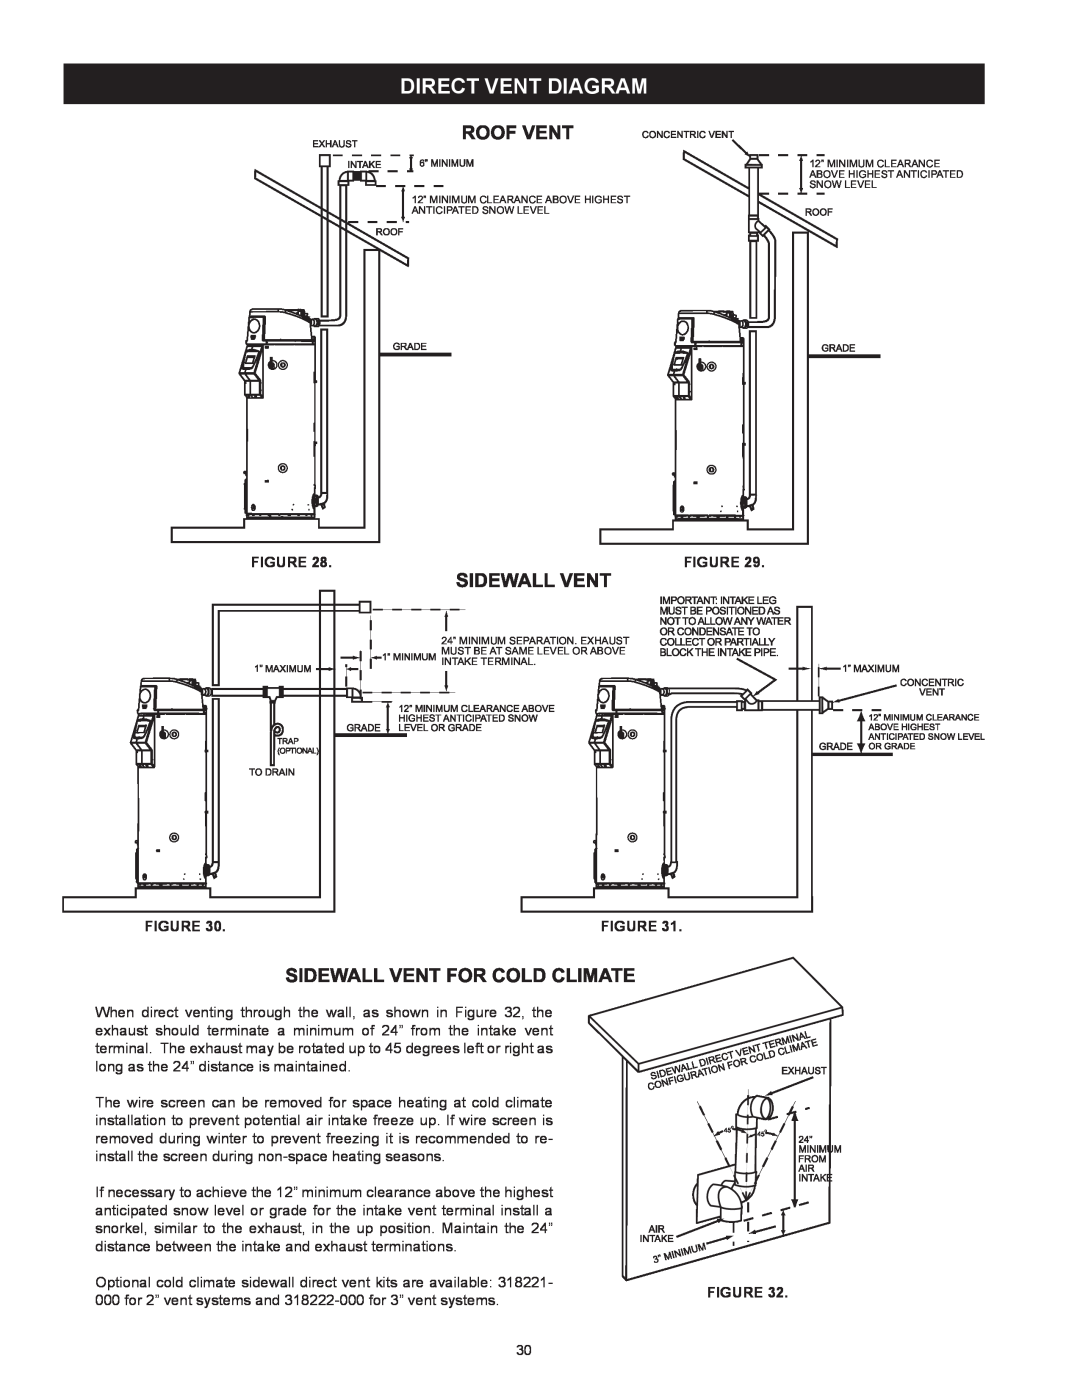 American Water Heater VG6250T100 instruction manual direct vent diagram 